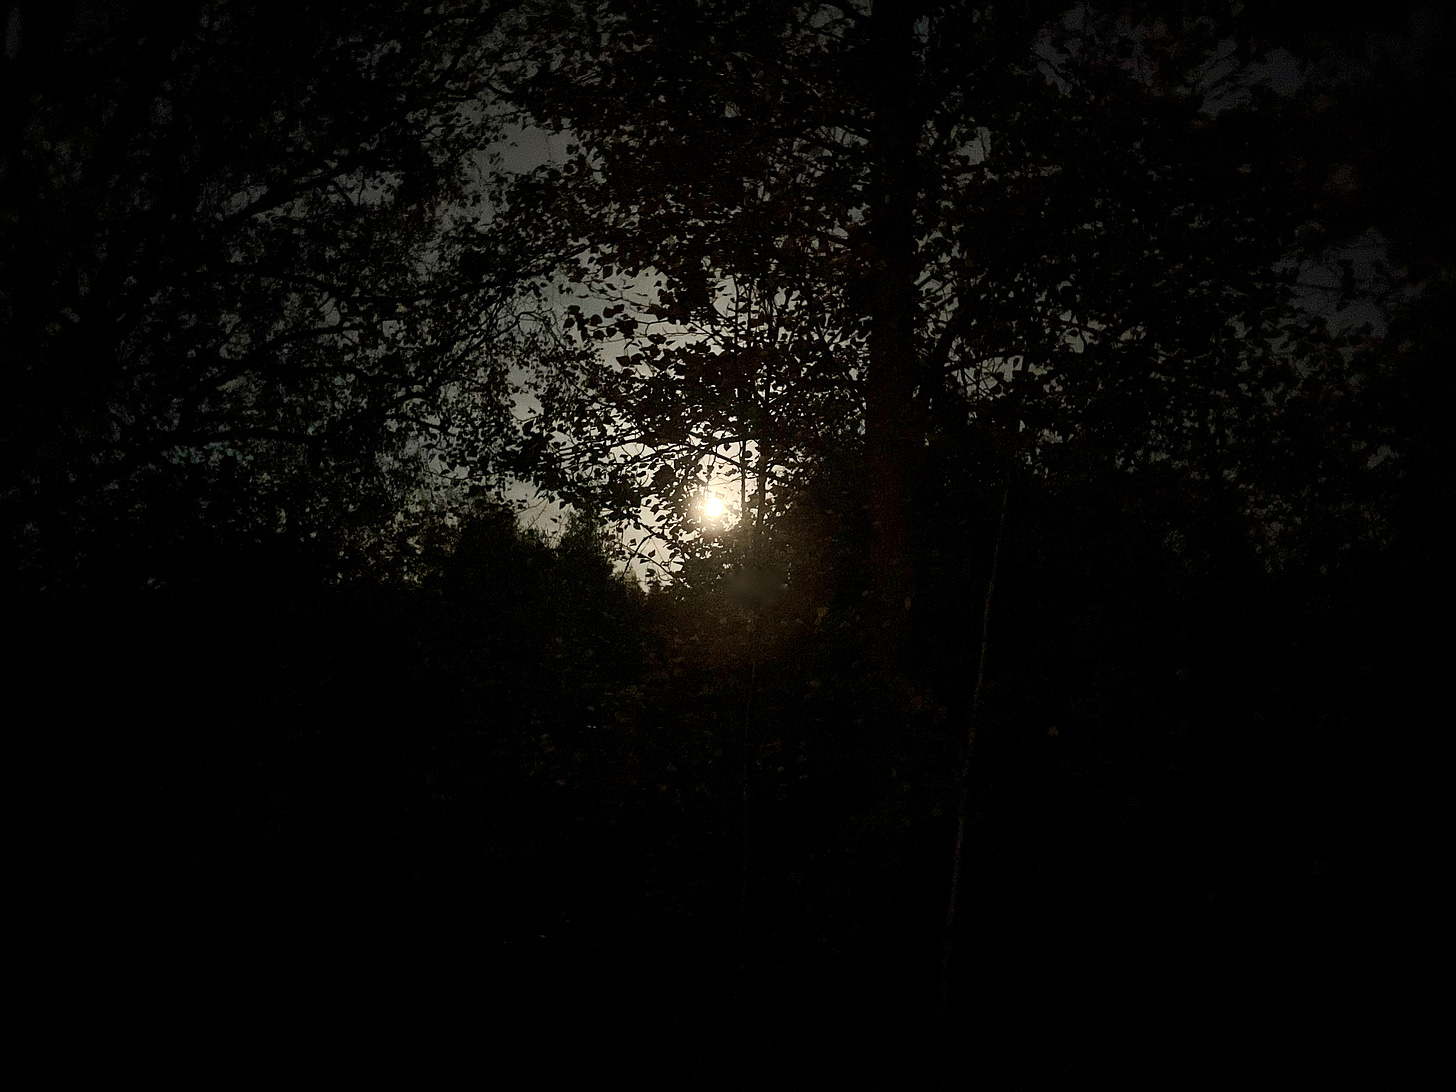 Full moon barely seen between birch tree branches at night